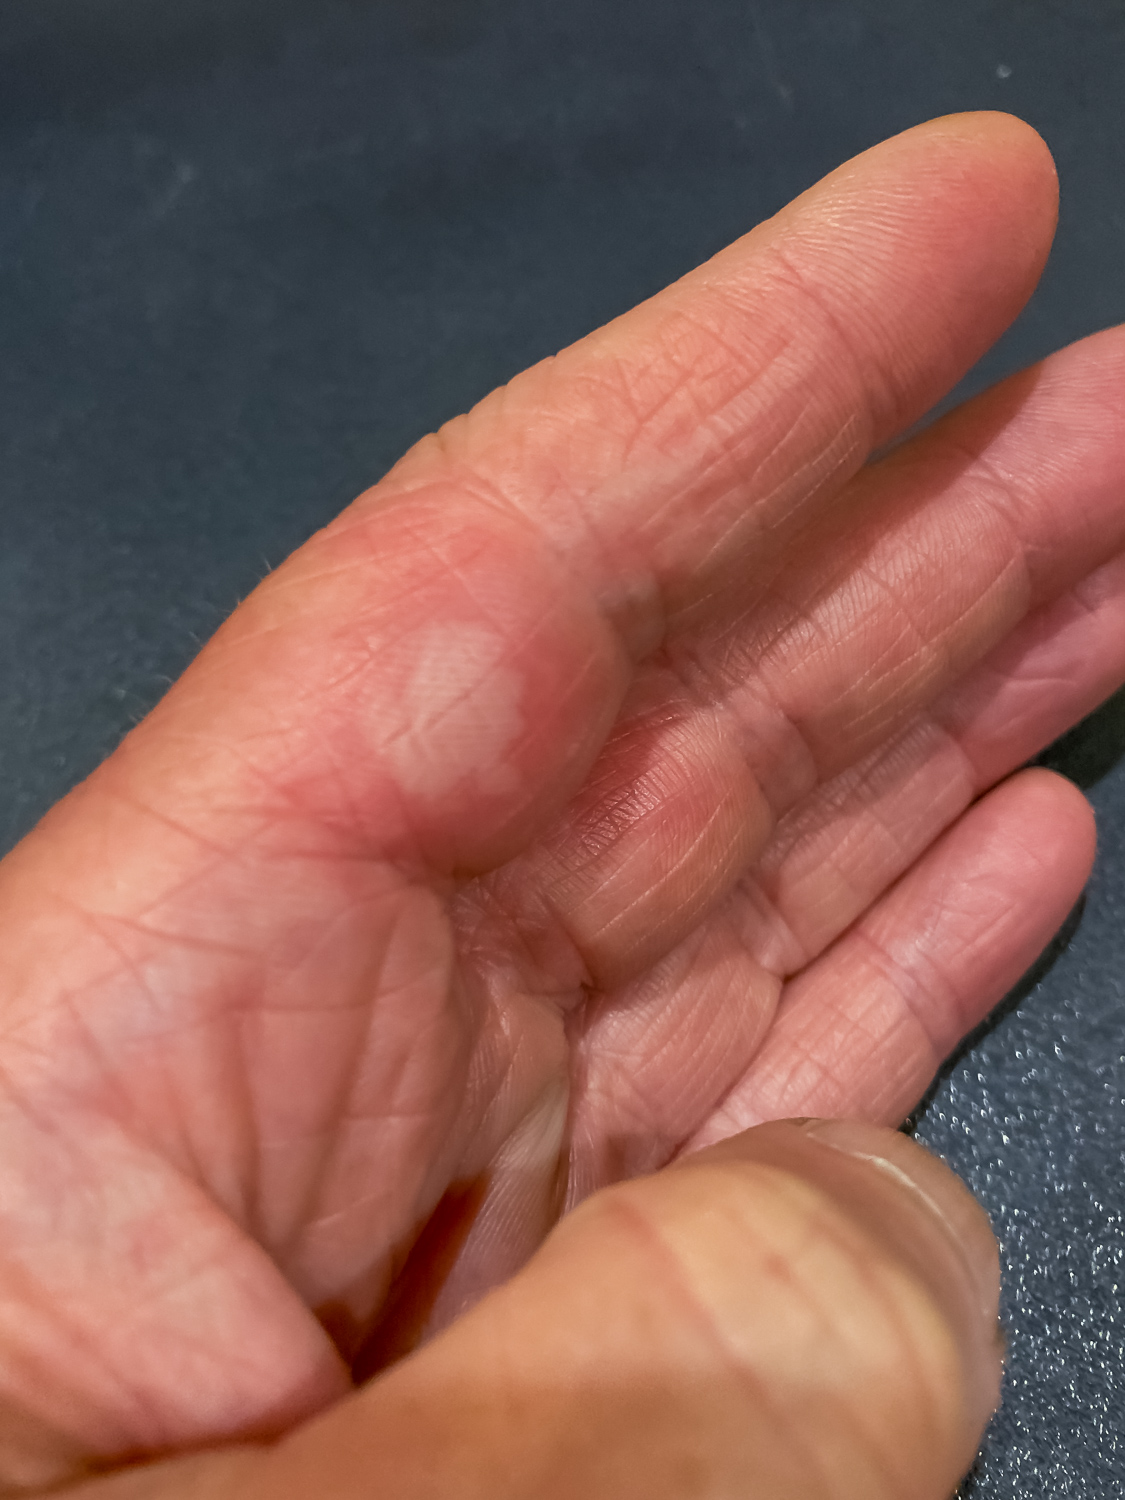 A photo of a left hand with a large burn blister underneath the pointer finger